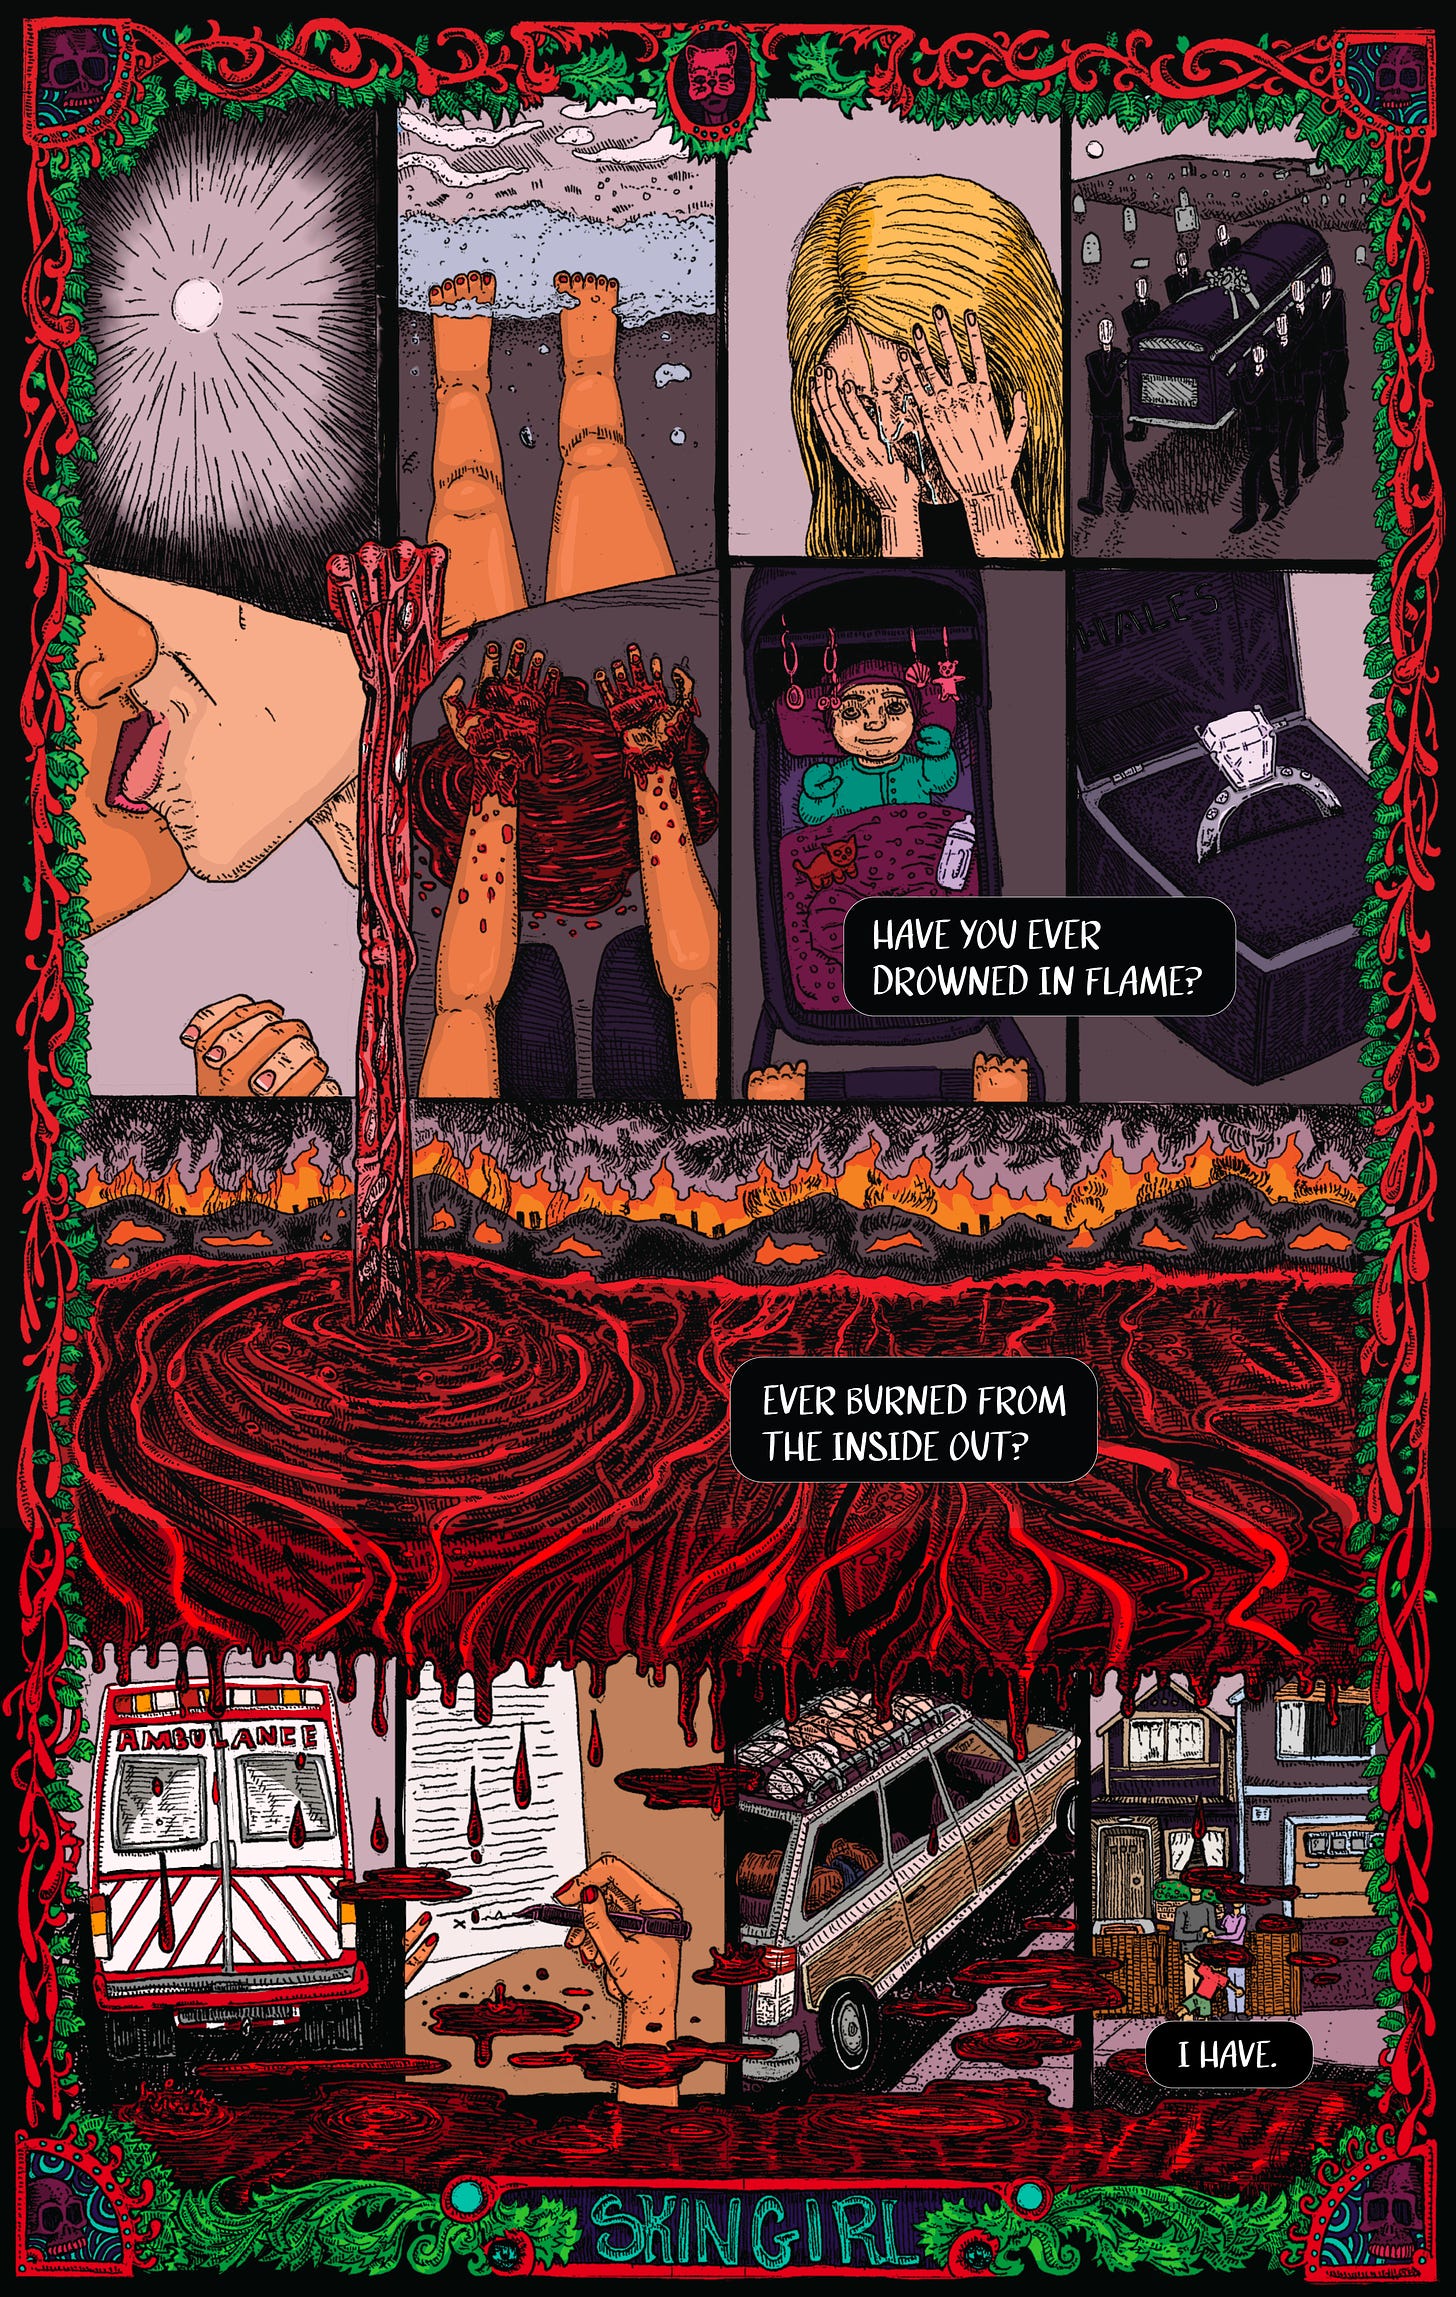 Skingirl page 1. Scenes from a life. Have you ever drowned in flame? Ever burned from the inside out?